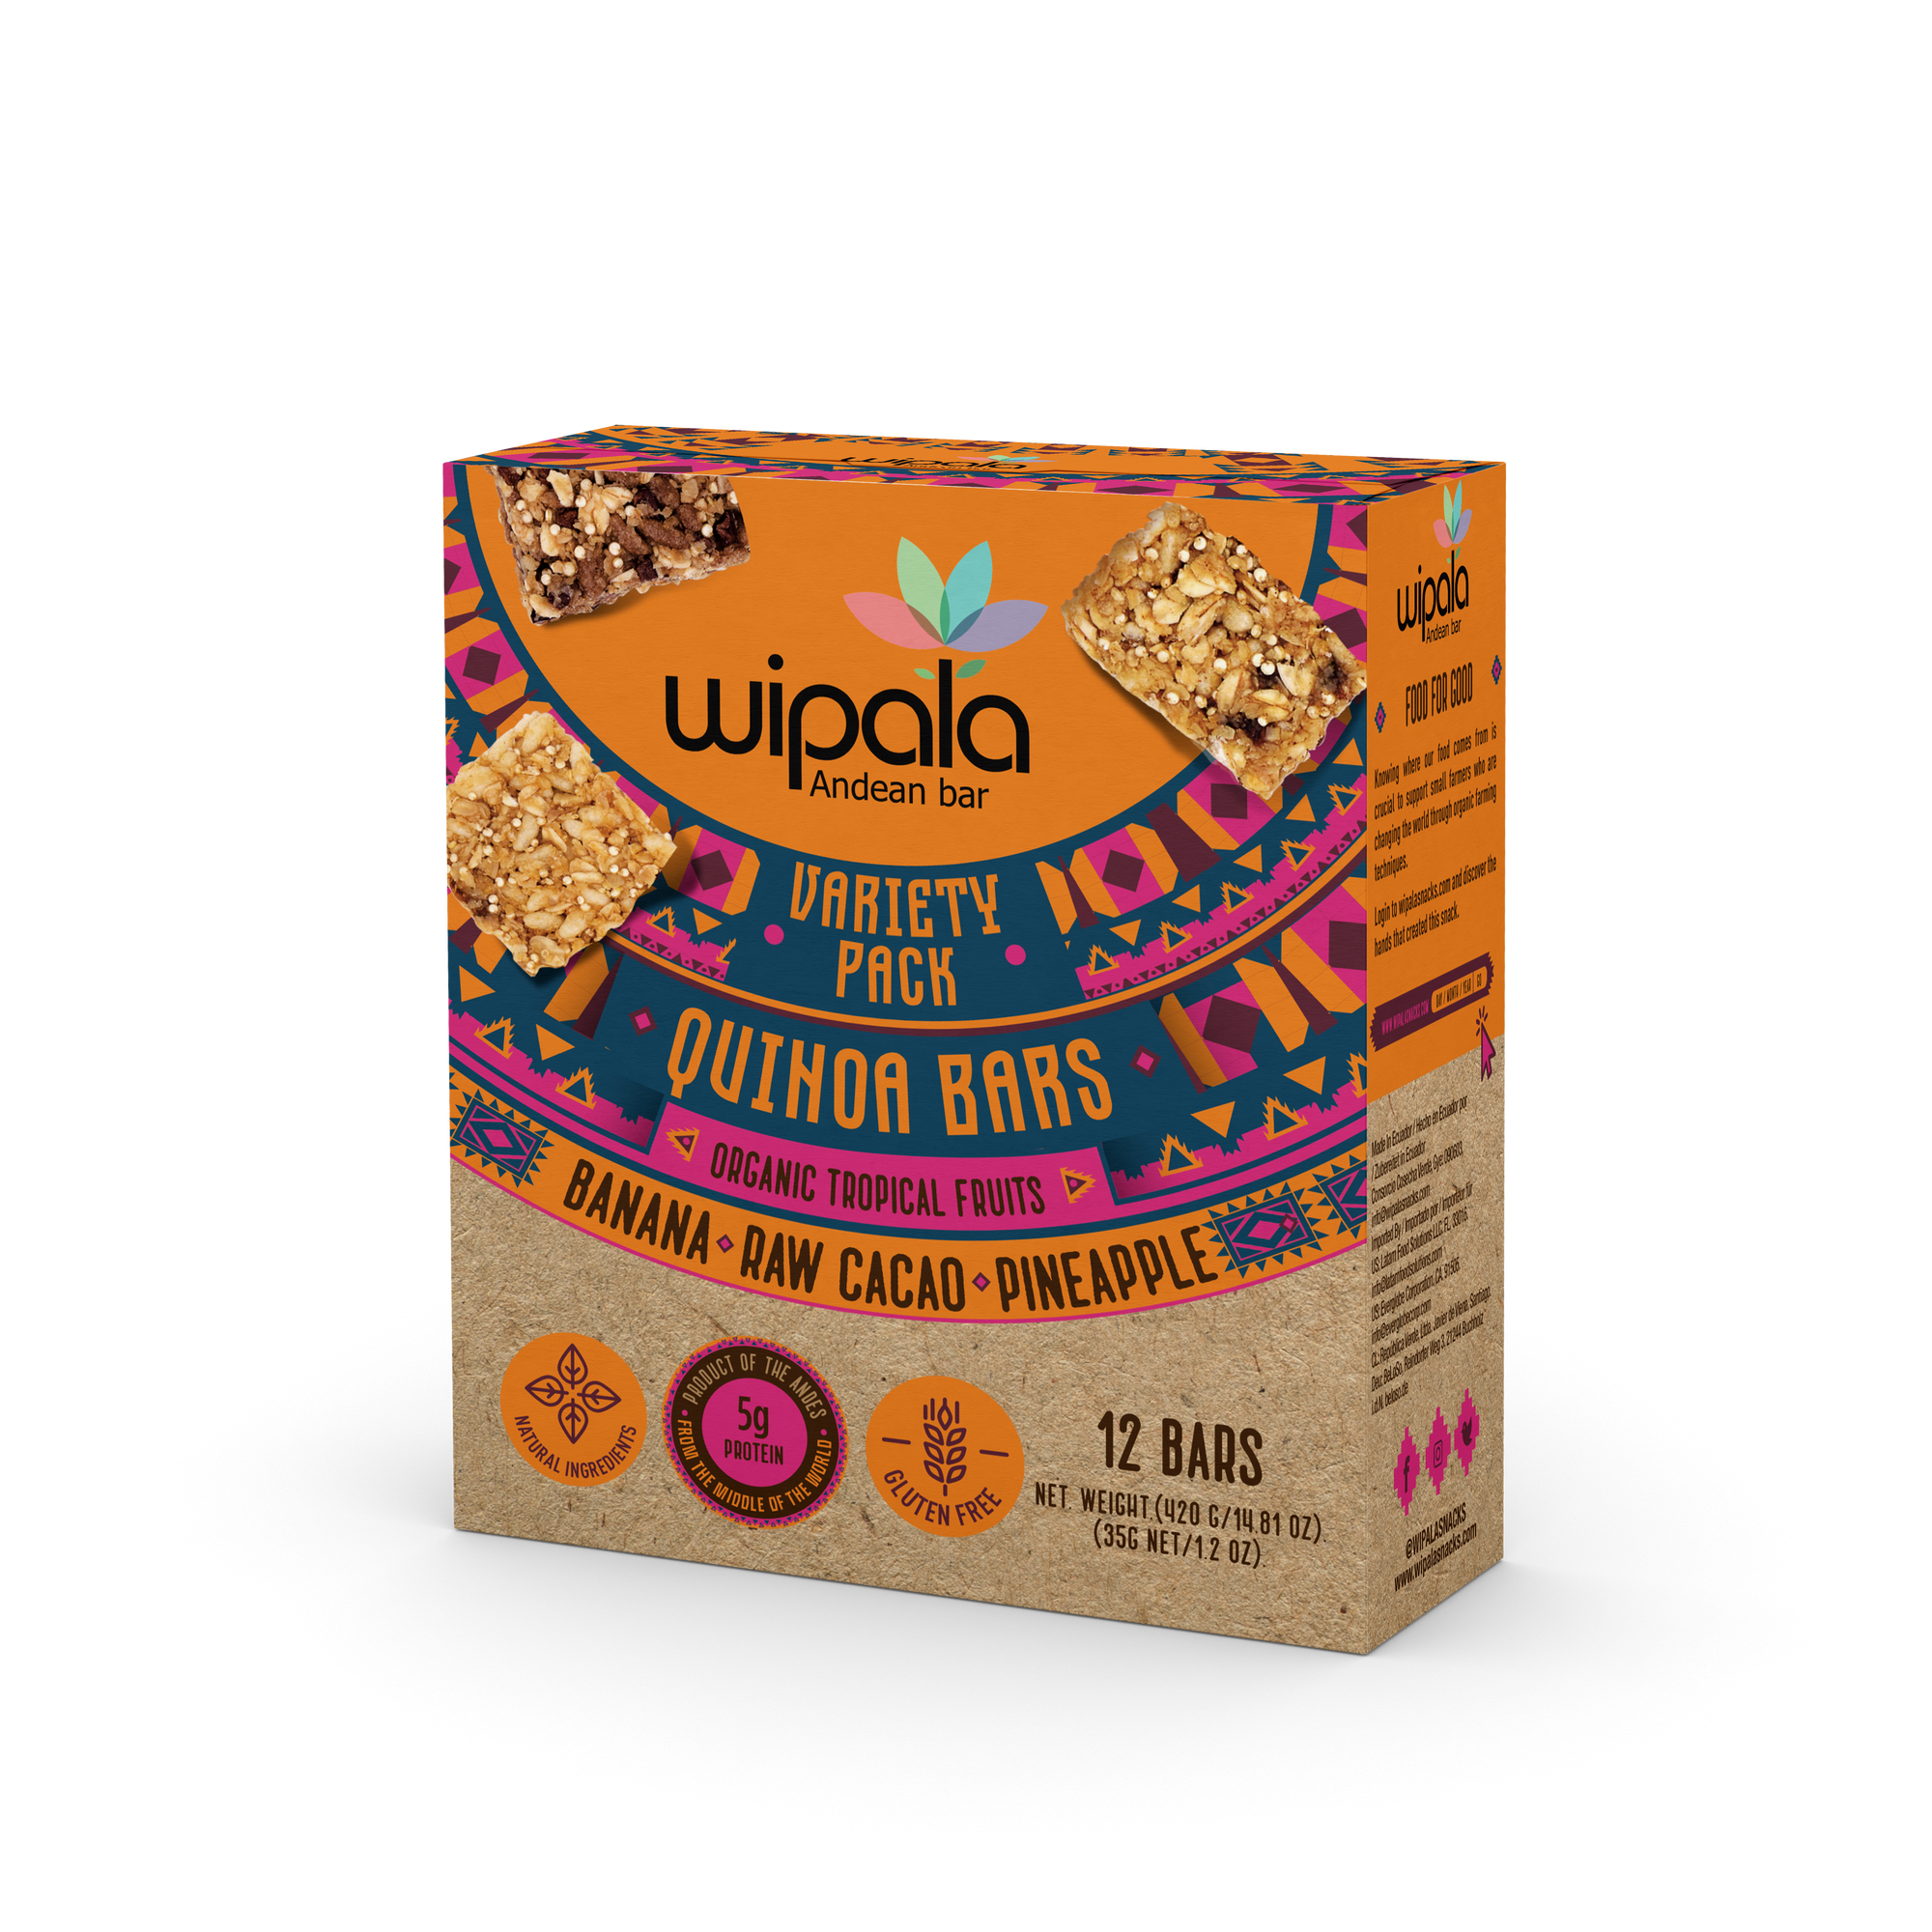 Wipala Andean Bar Variety Mix of Pineapple, Raw Cacao, Banana | Healthy Energy Bar with Organic Quinoa and Andean Lupin, Vegan, Gluten Free, and Non-GMO| 12 Pack